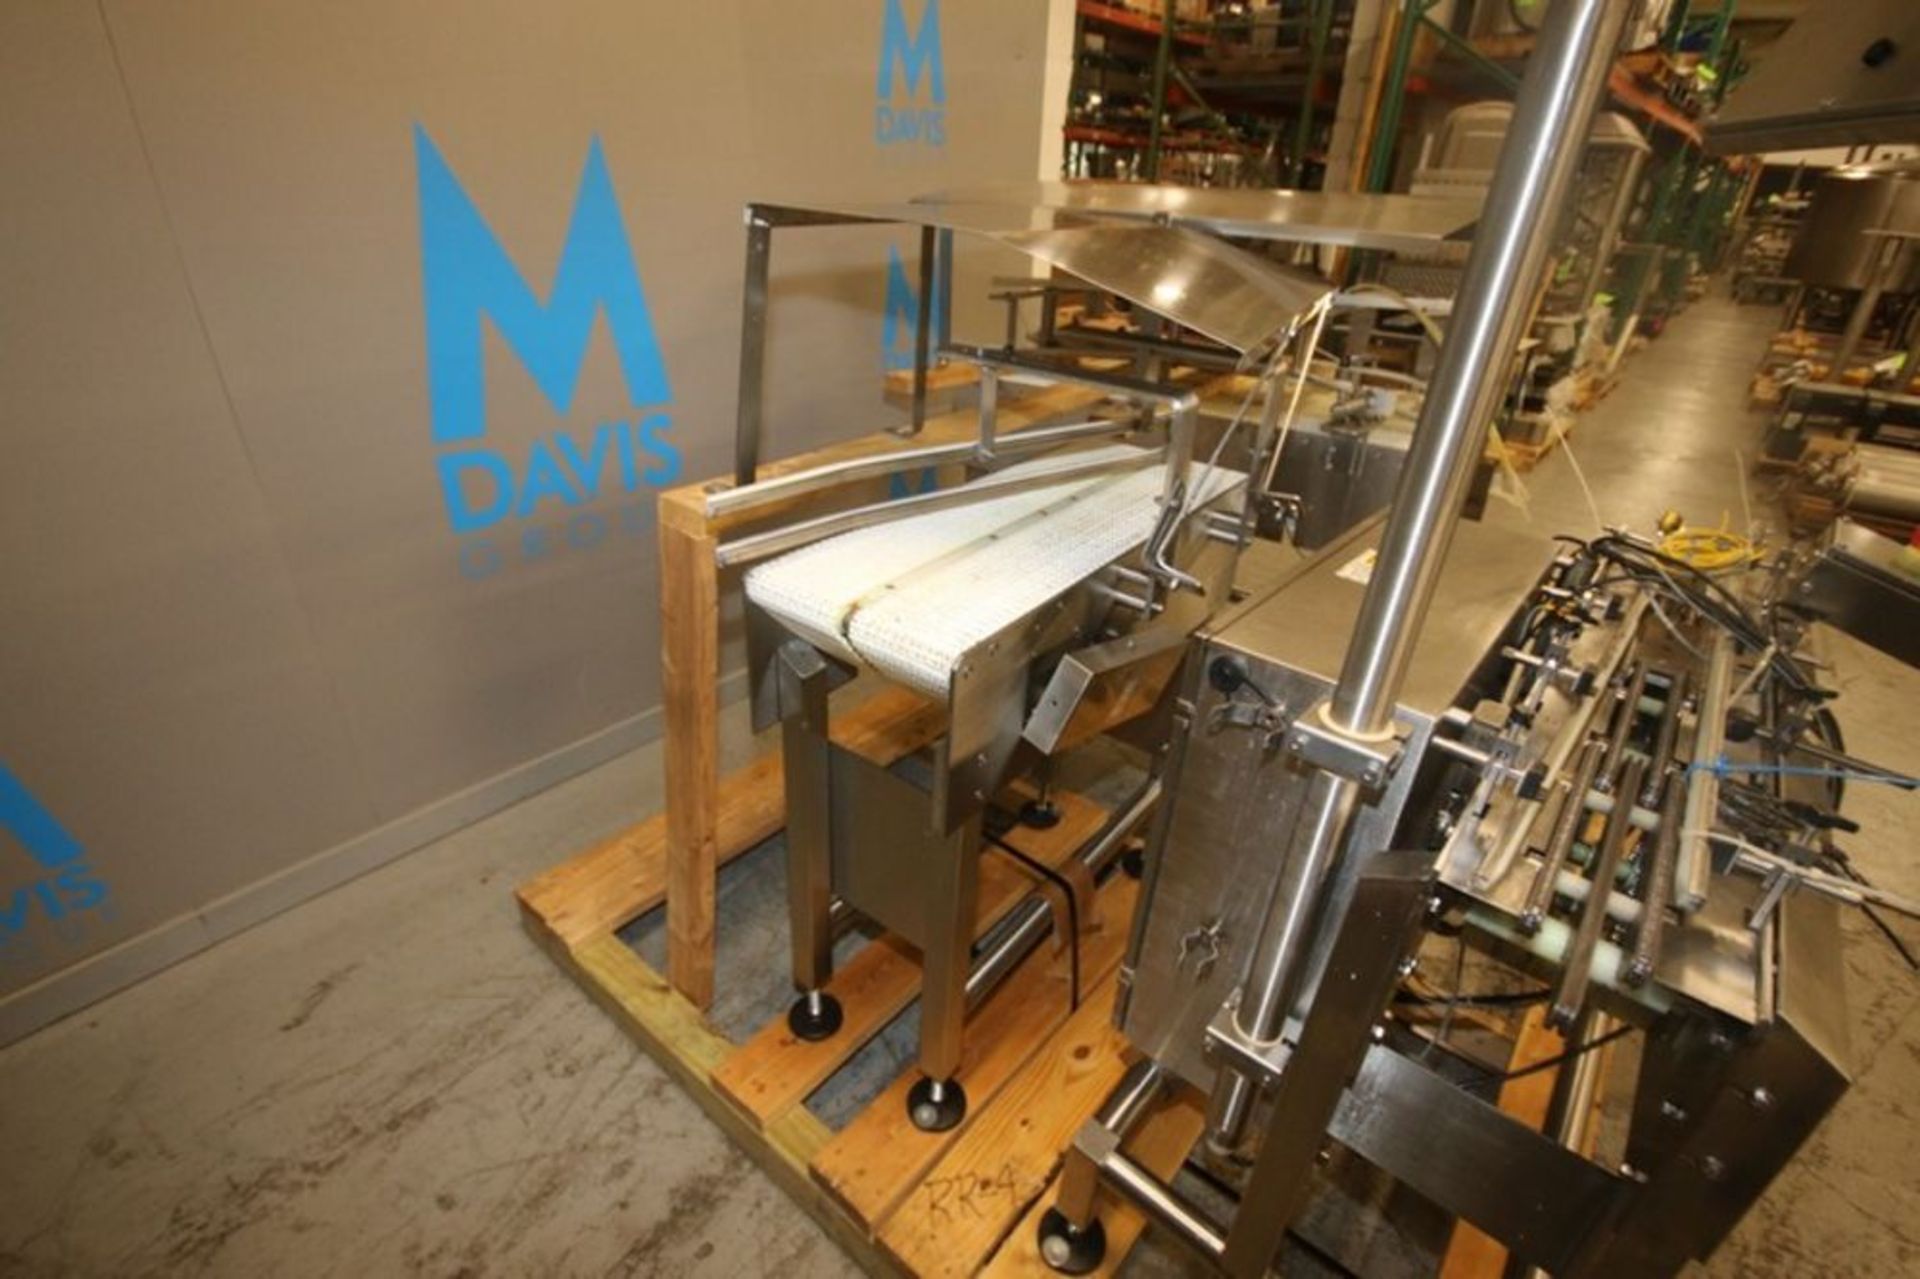 Mettler Toldeo Hi-Speed Check Weigher, M/N XS, S/N 12005321, 120 Volts, 1 Phase, with (2) Sections - Image 6 of 12